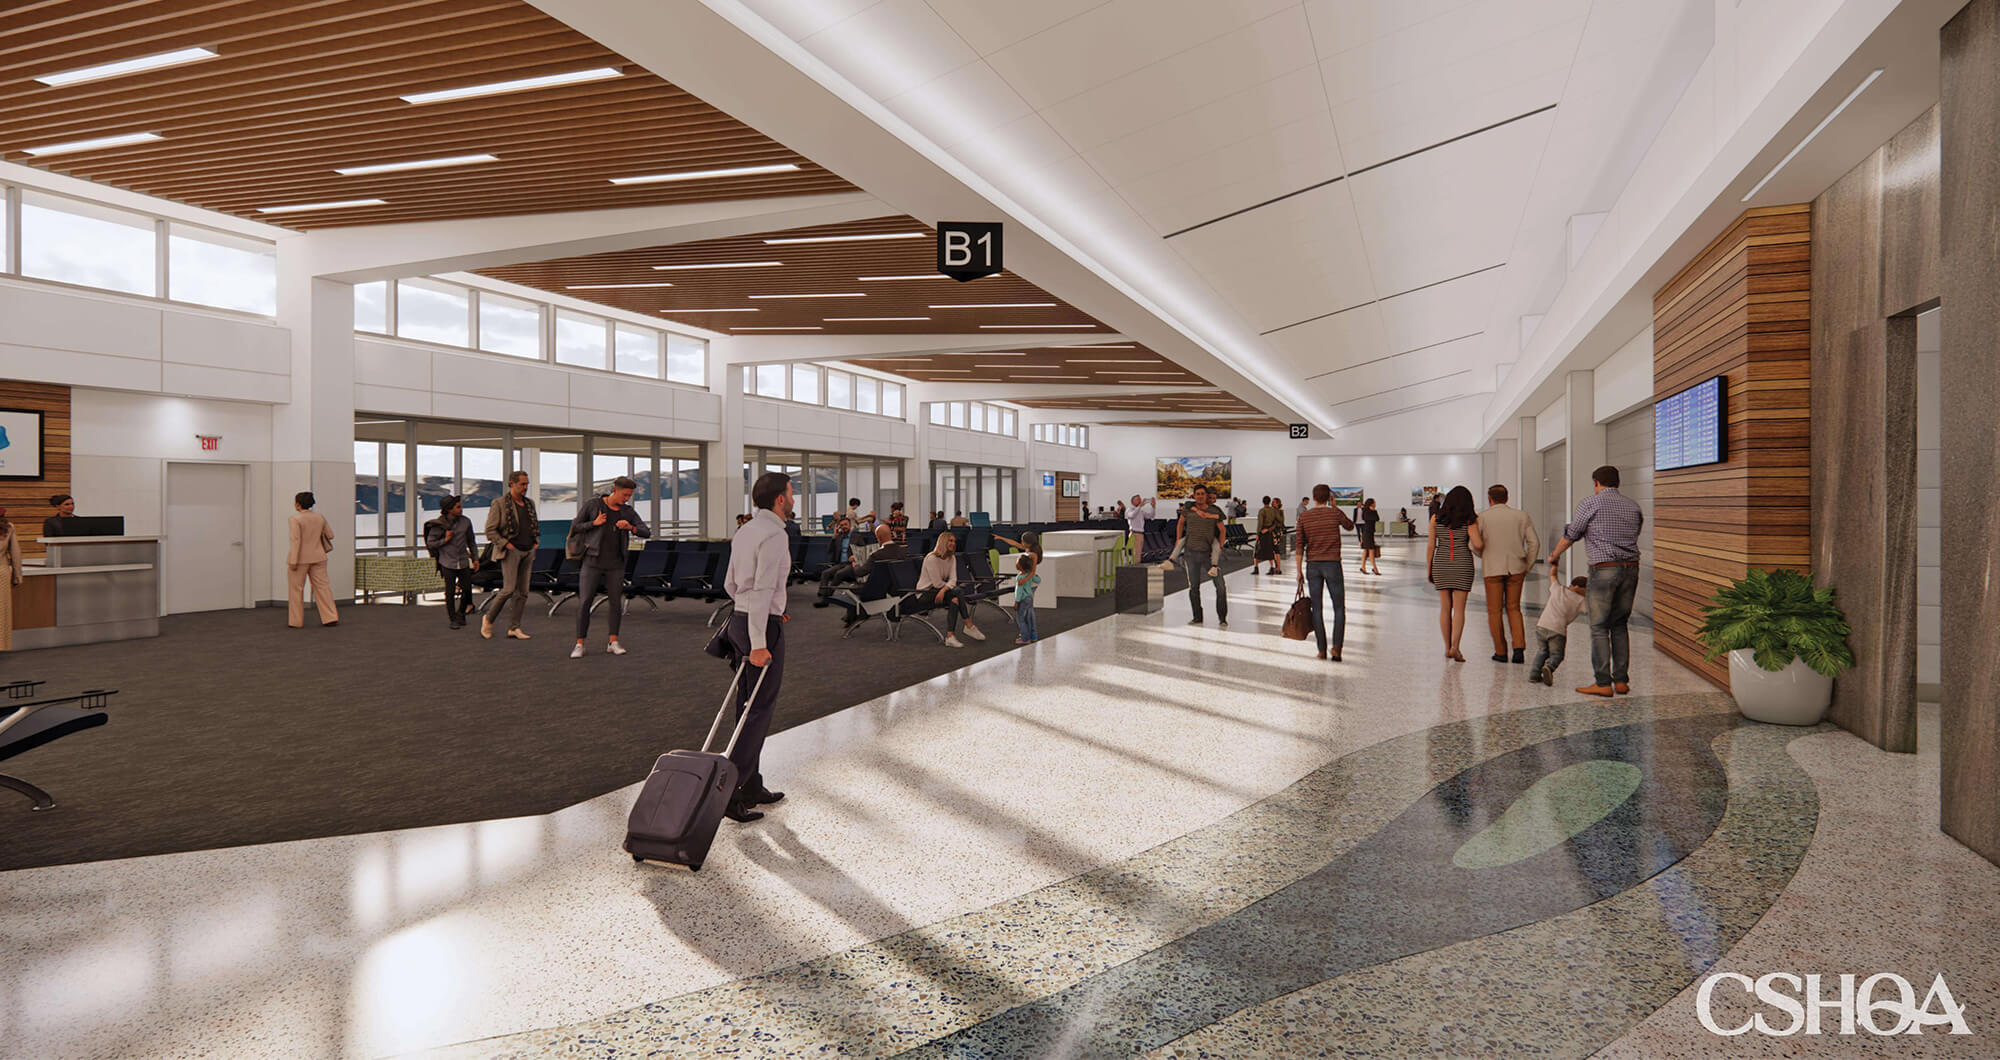 Architectural rendering of the Fresno Airport concourse B